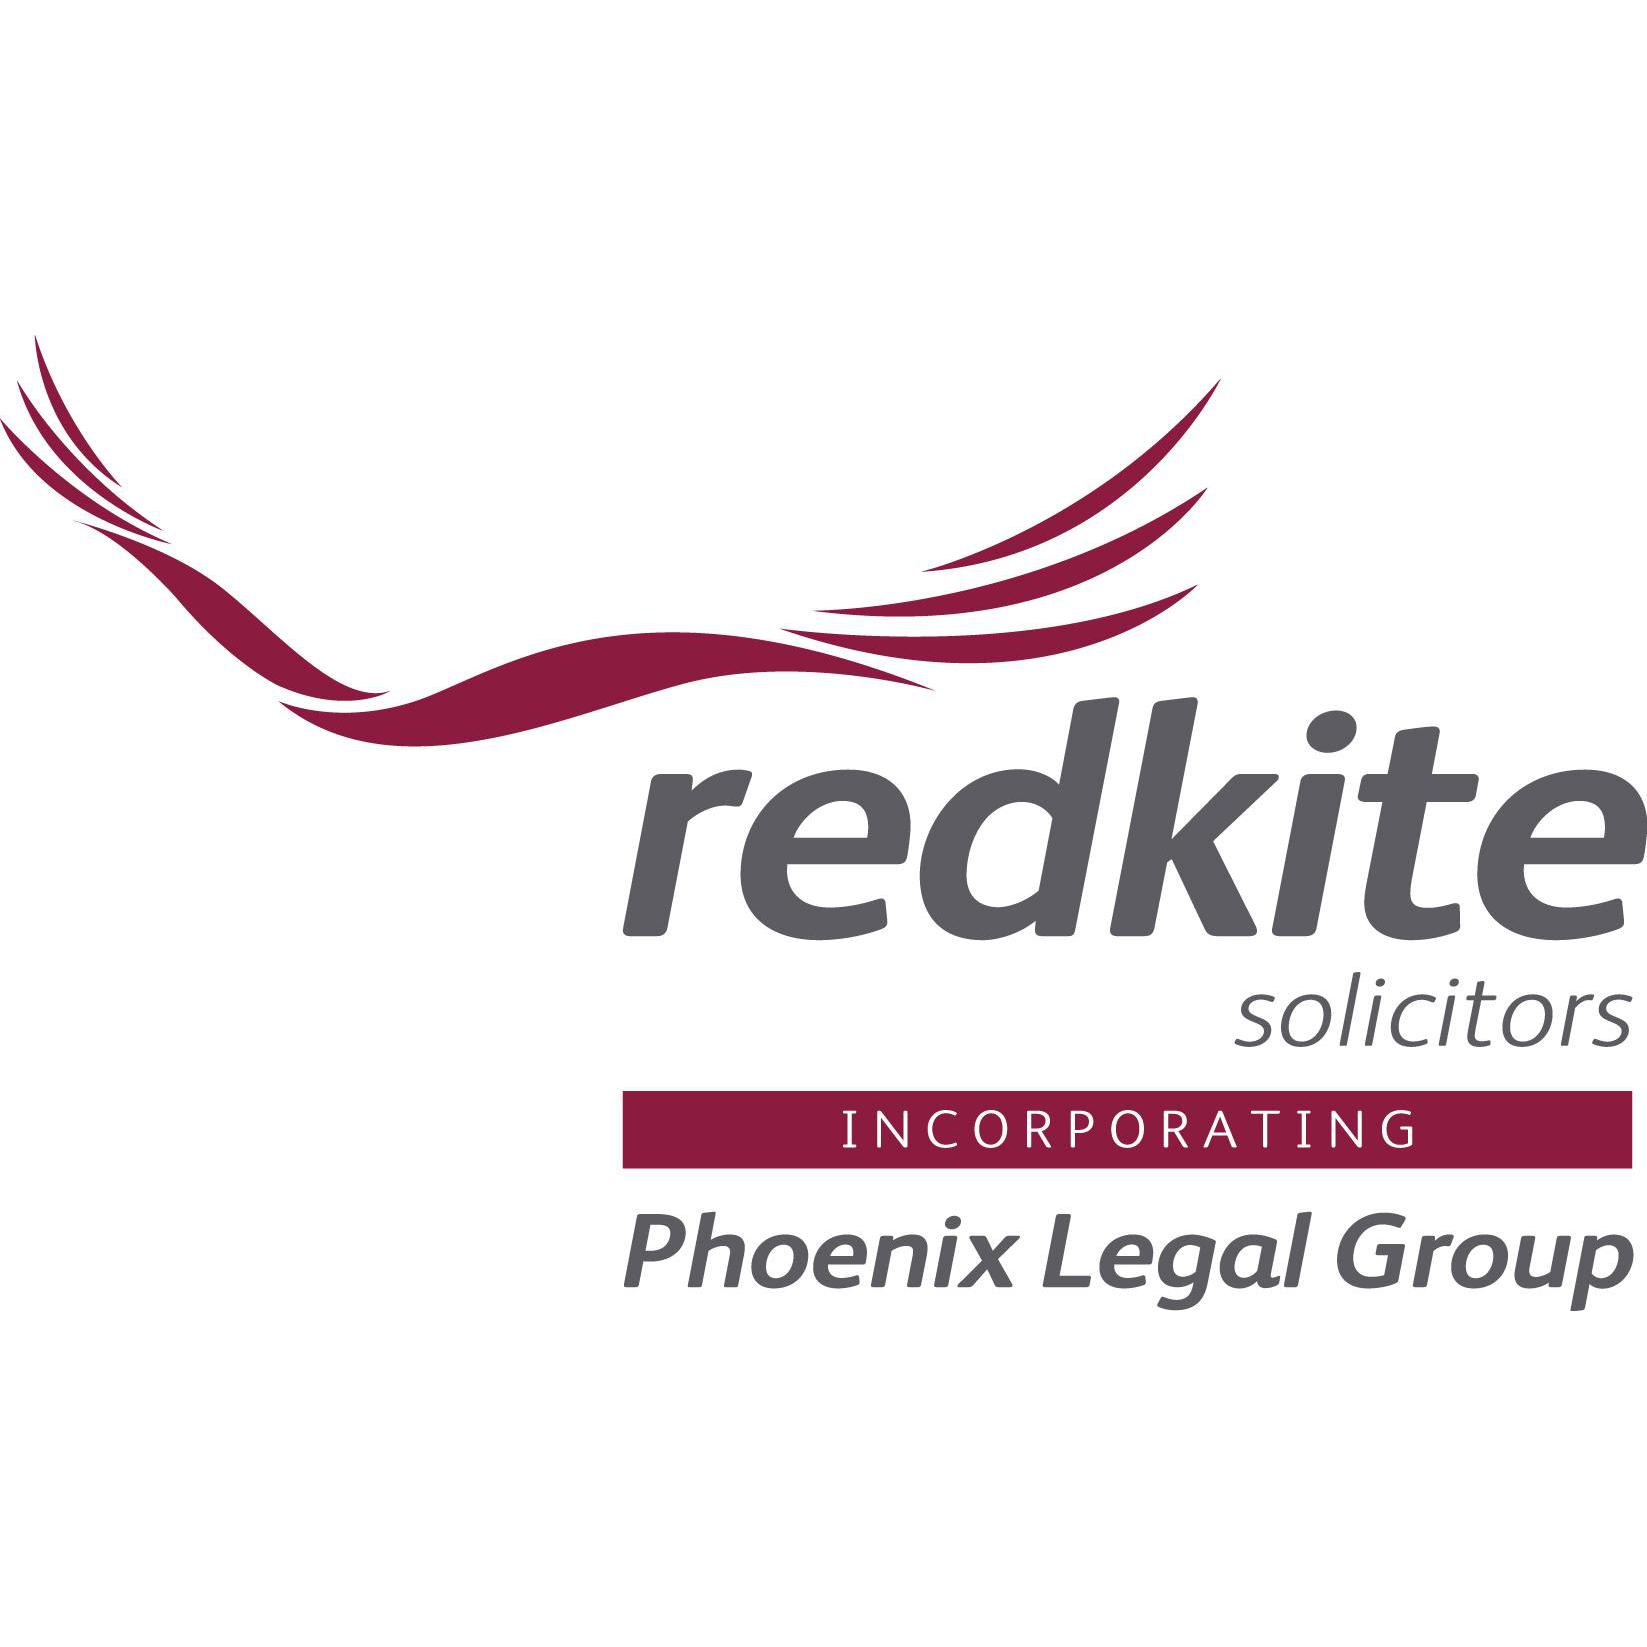 Redkite Solicitors Incorporating Phoenix Legal Group - Dursley, Gloucestershire GL11 4JW - 01453 547221 | ShowMeLocal.com